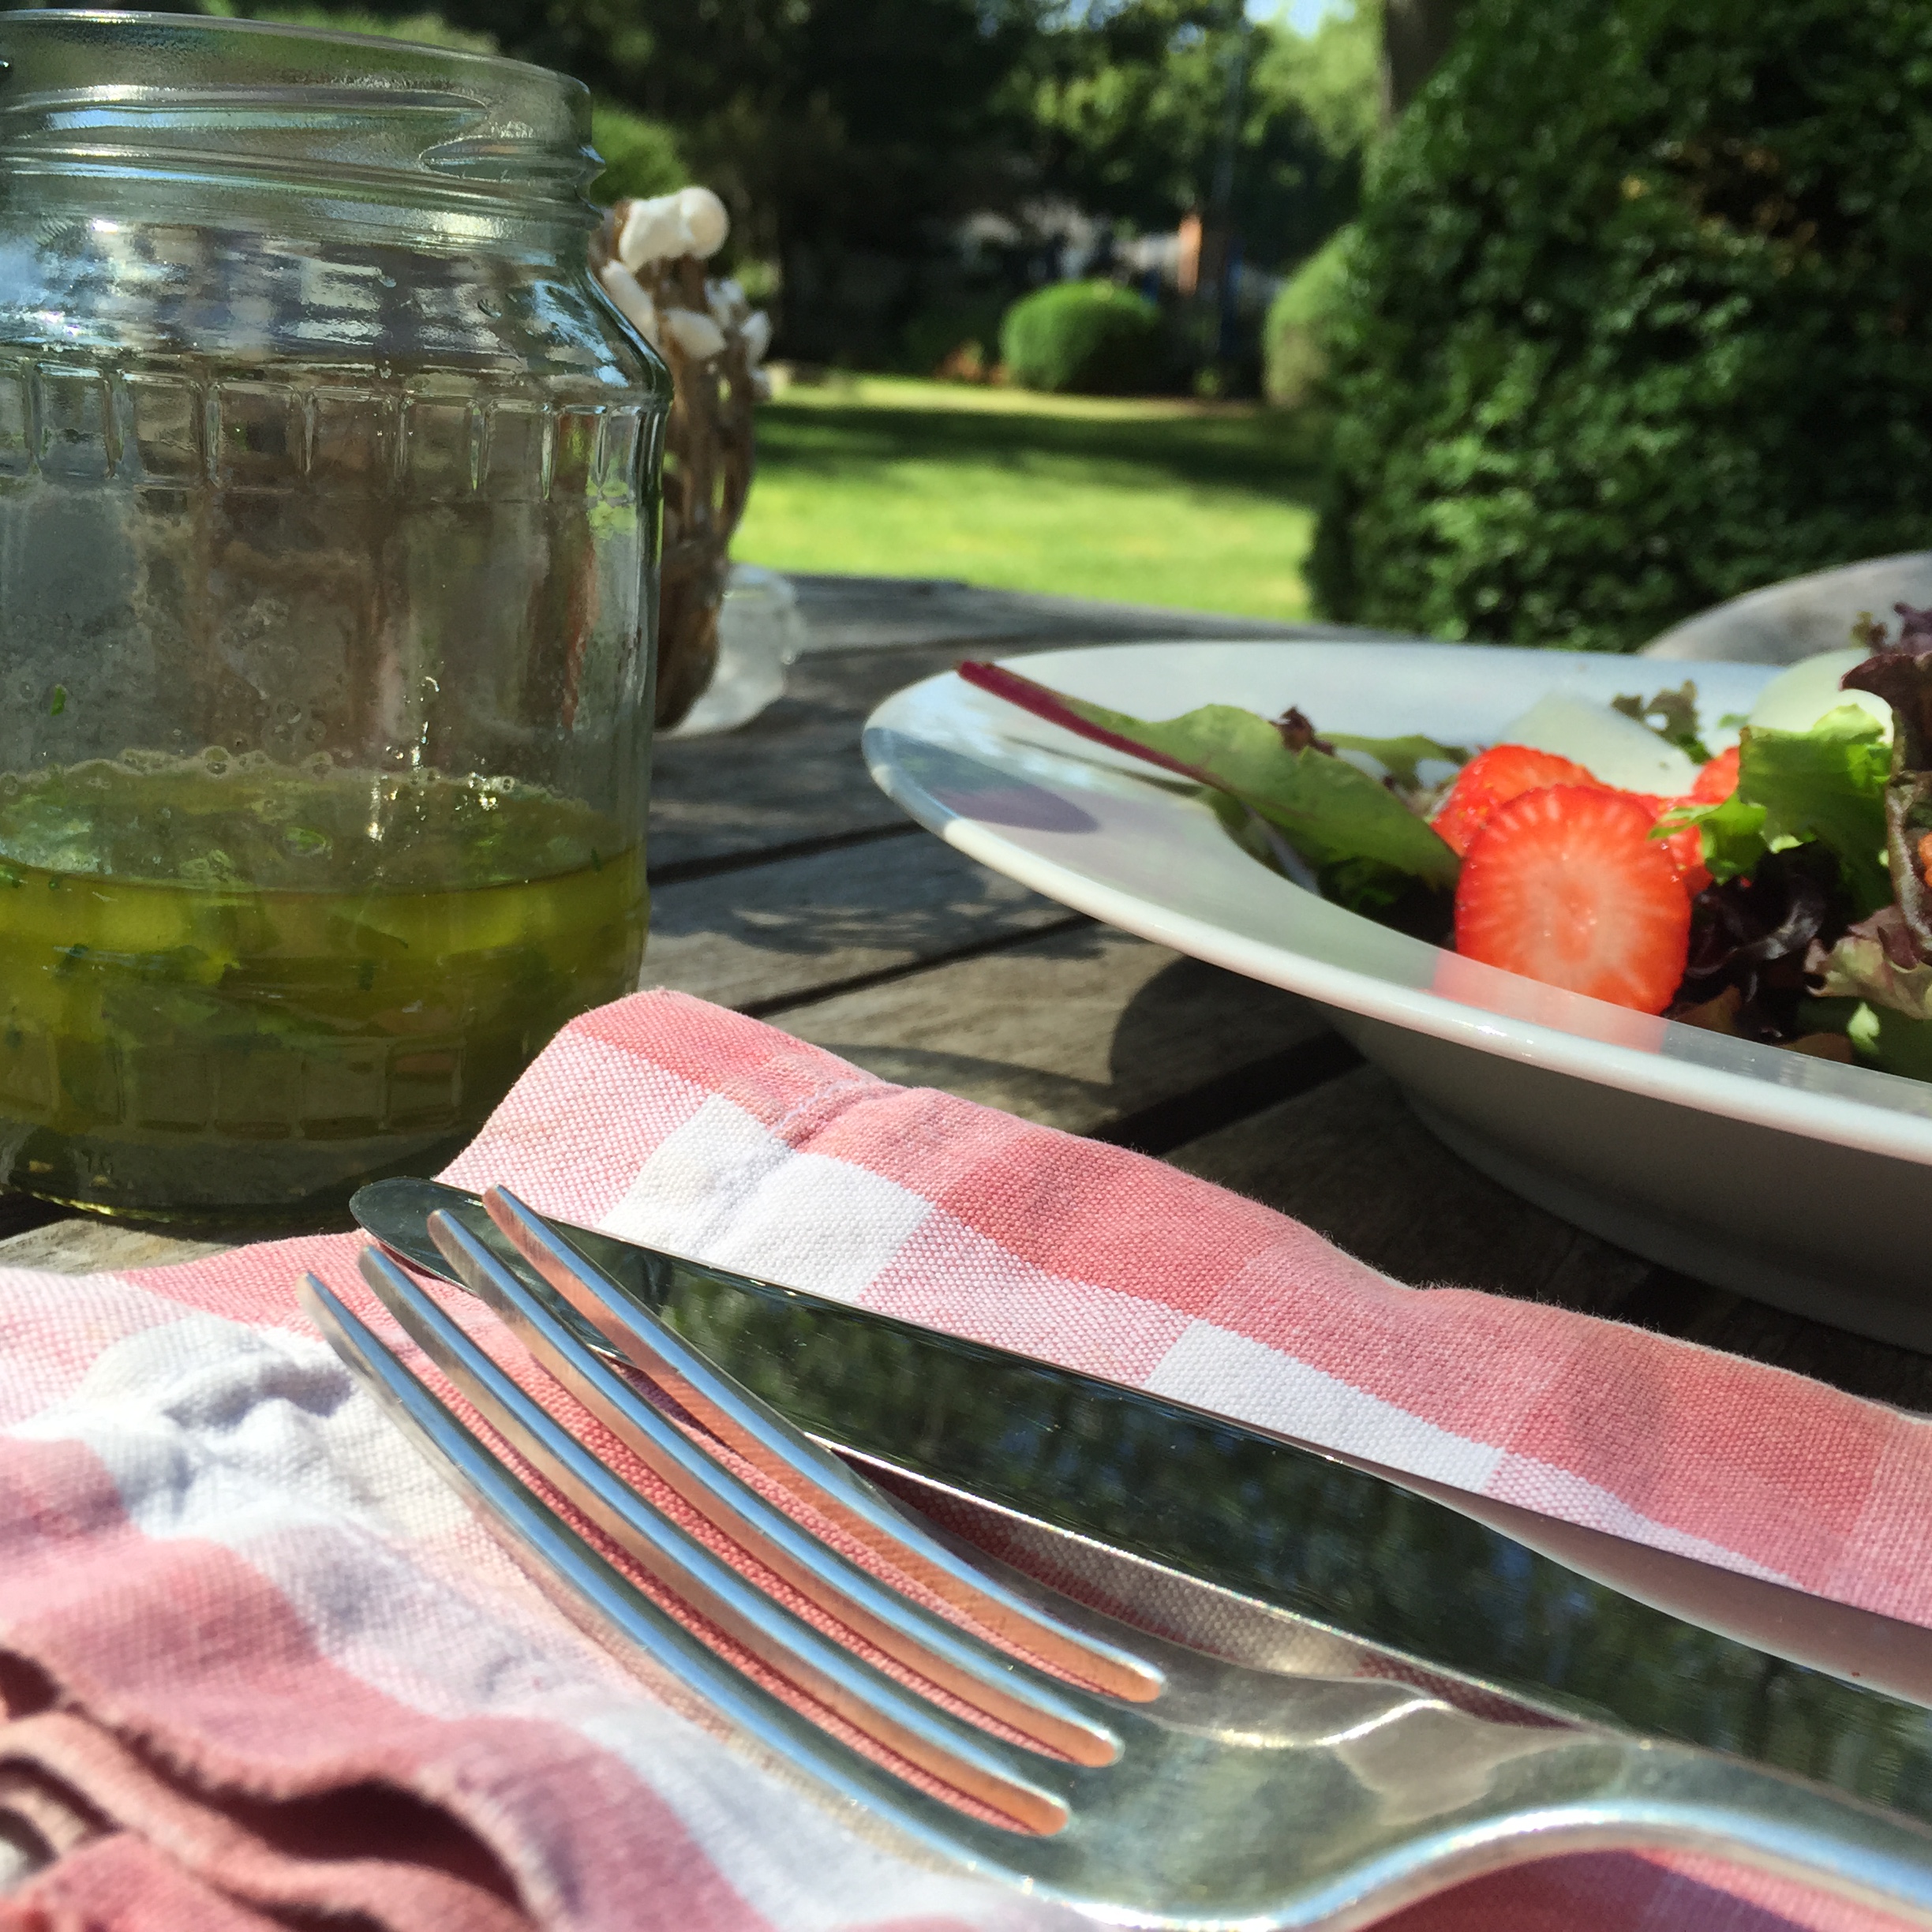 Julie’s Salad Dressing with Herbs